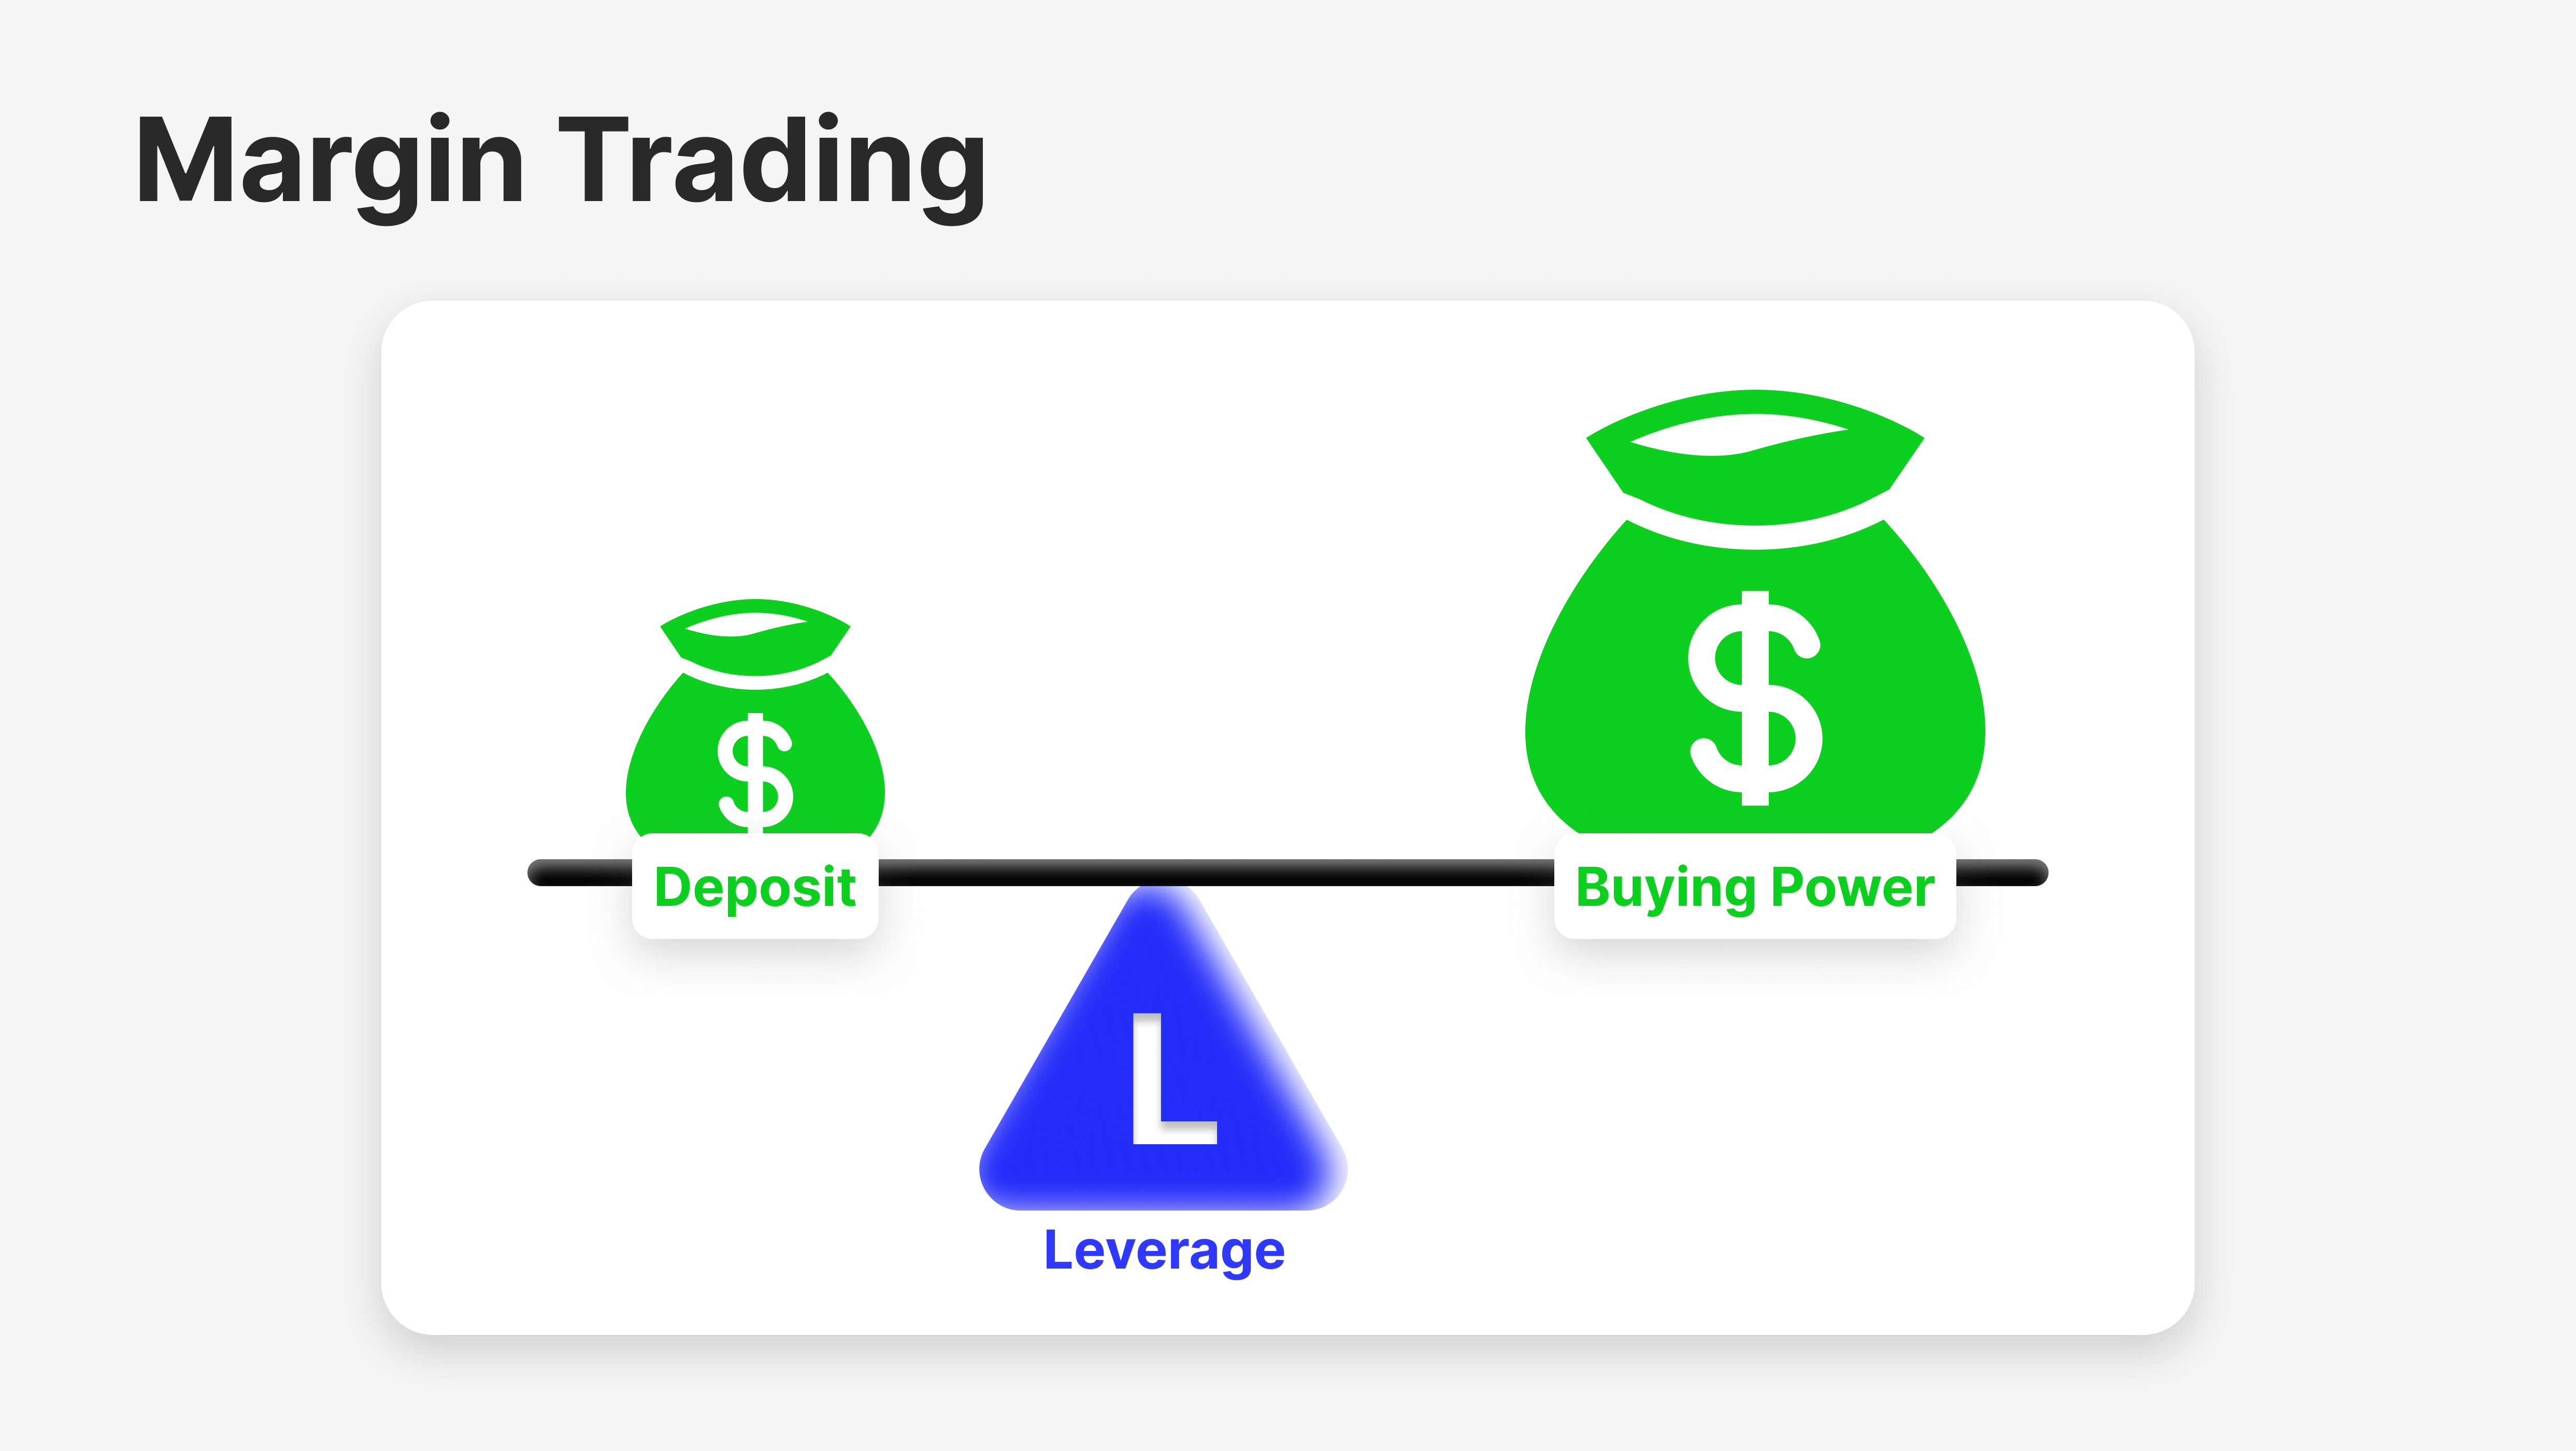 How to Calculate Buying Power When You Trade on Margin